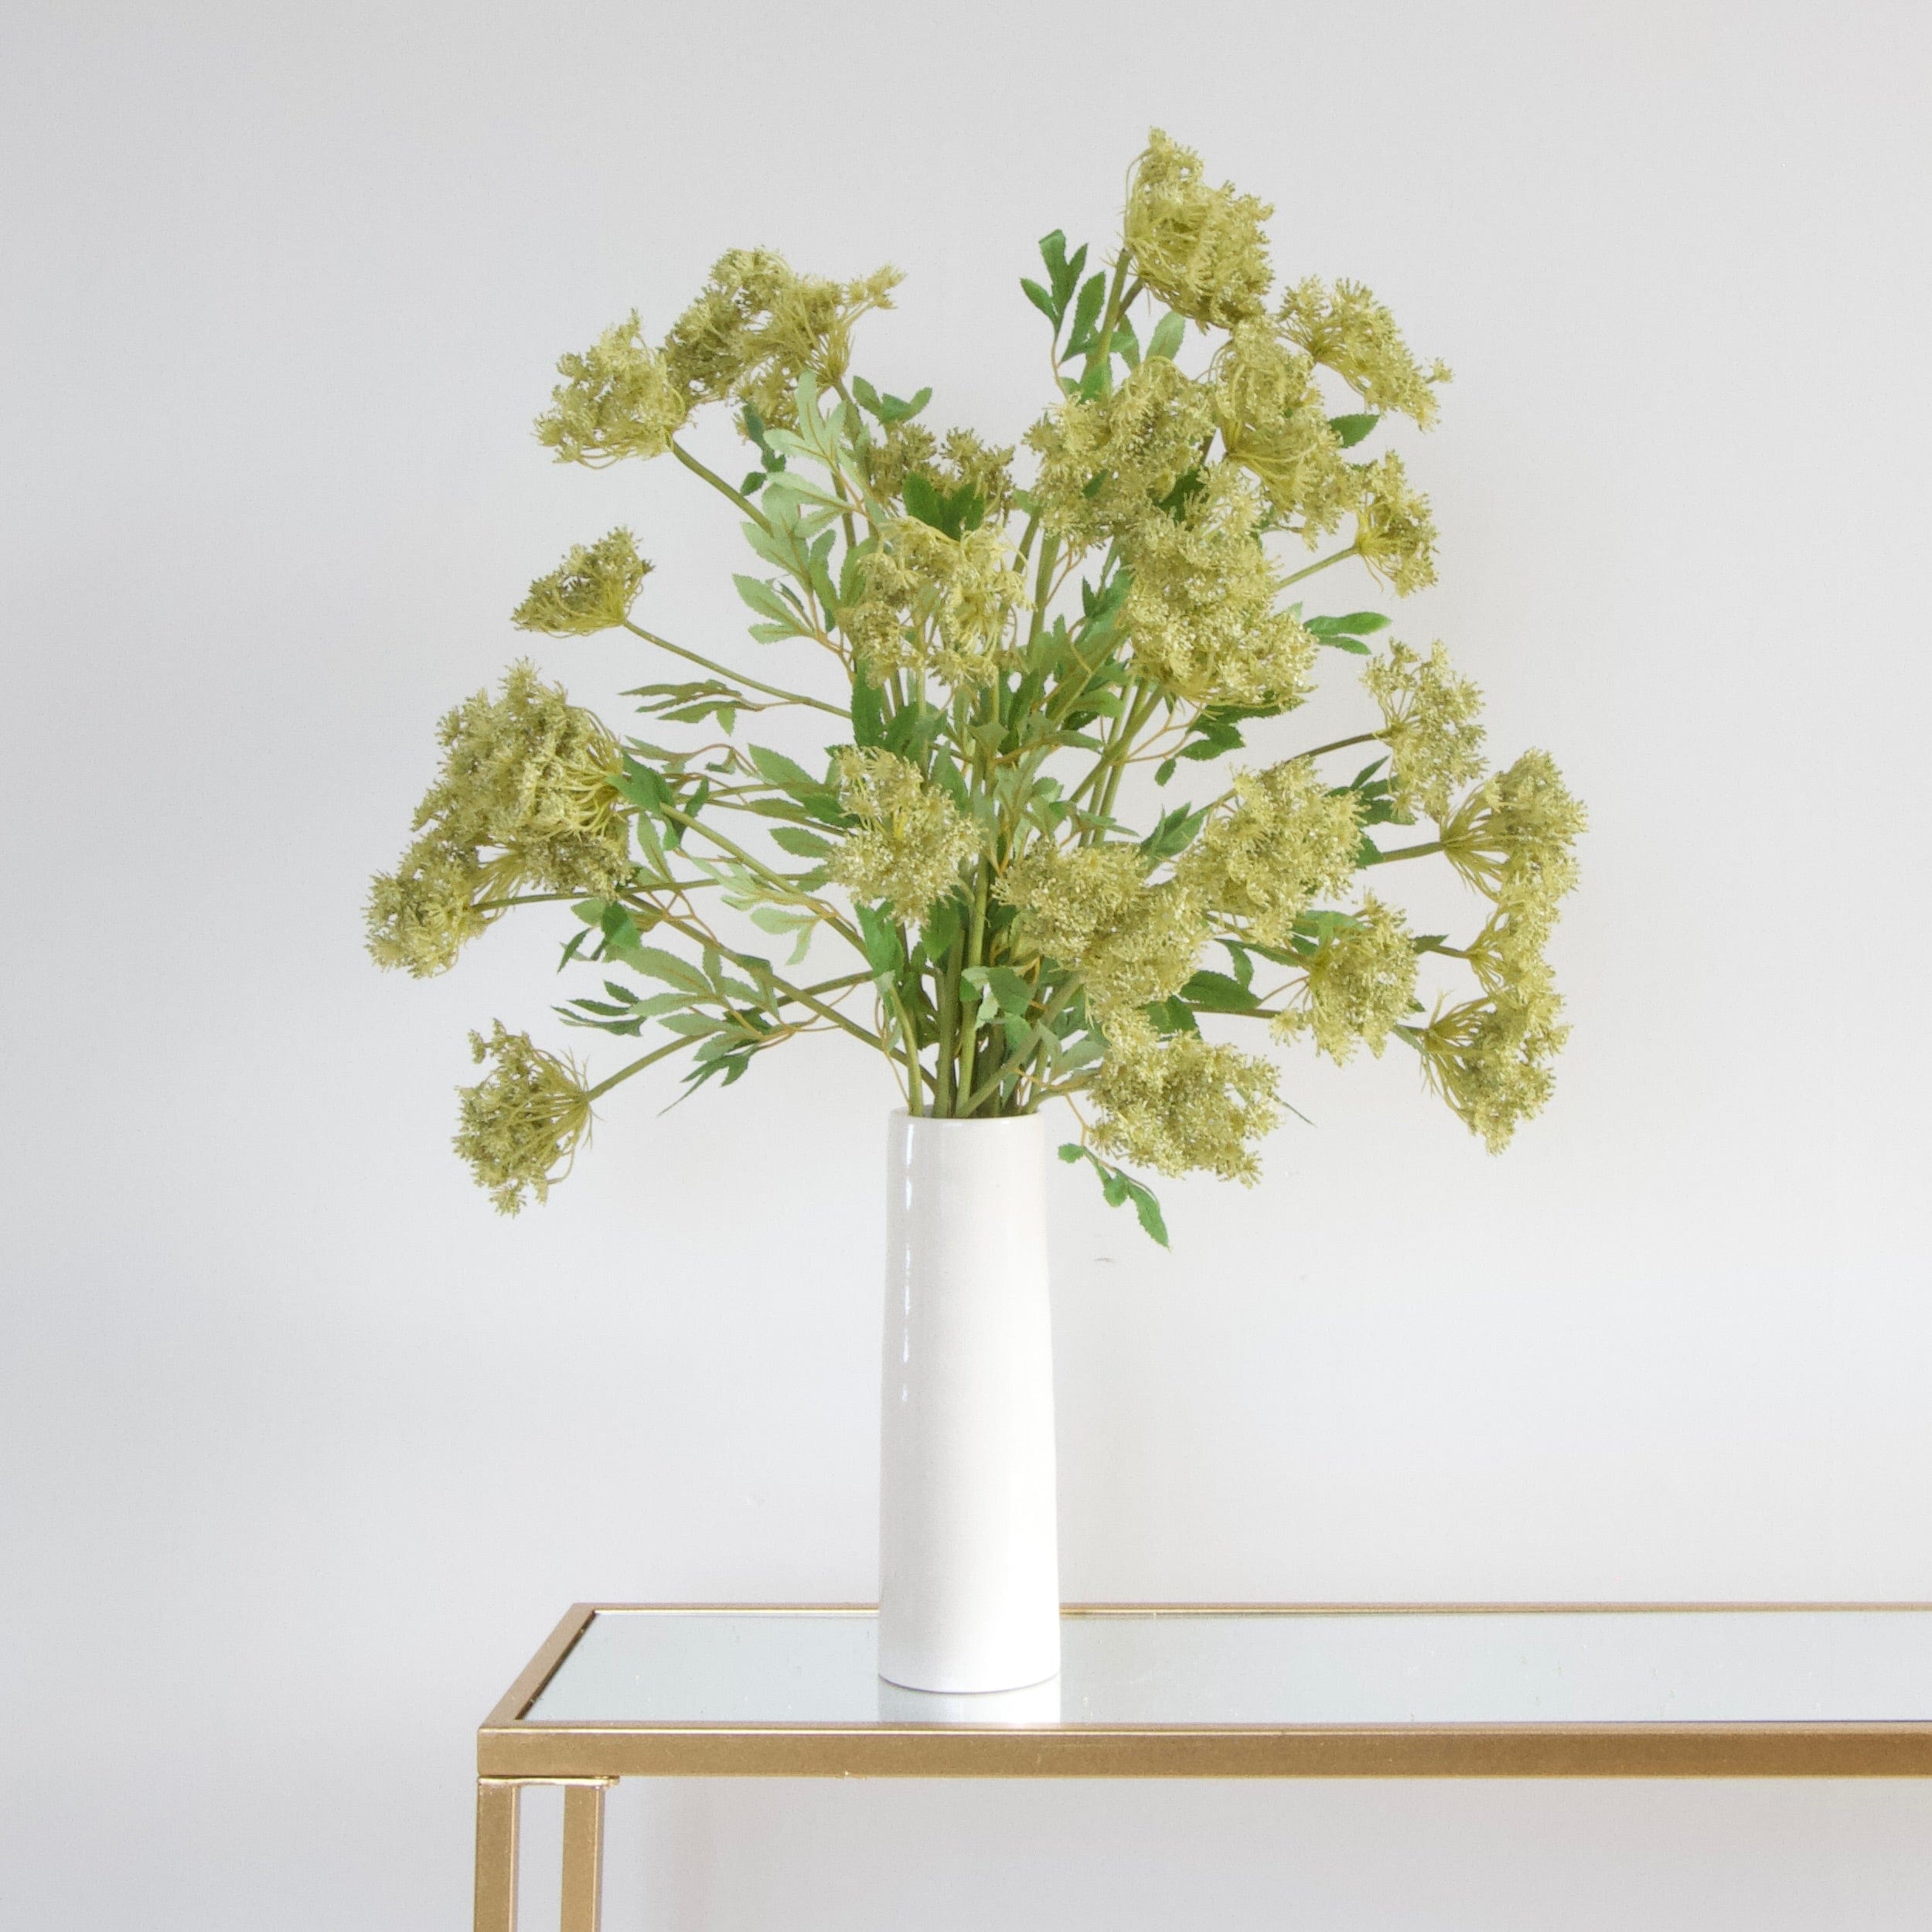 Luxury Lifelike Realistic Artificial Fabric Silk Blooms with Foliage Buy Online from The Faux Flower Company | 10 stems Green Cow Parsley Spray ABX6595GR in Prestbury Vase